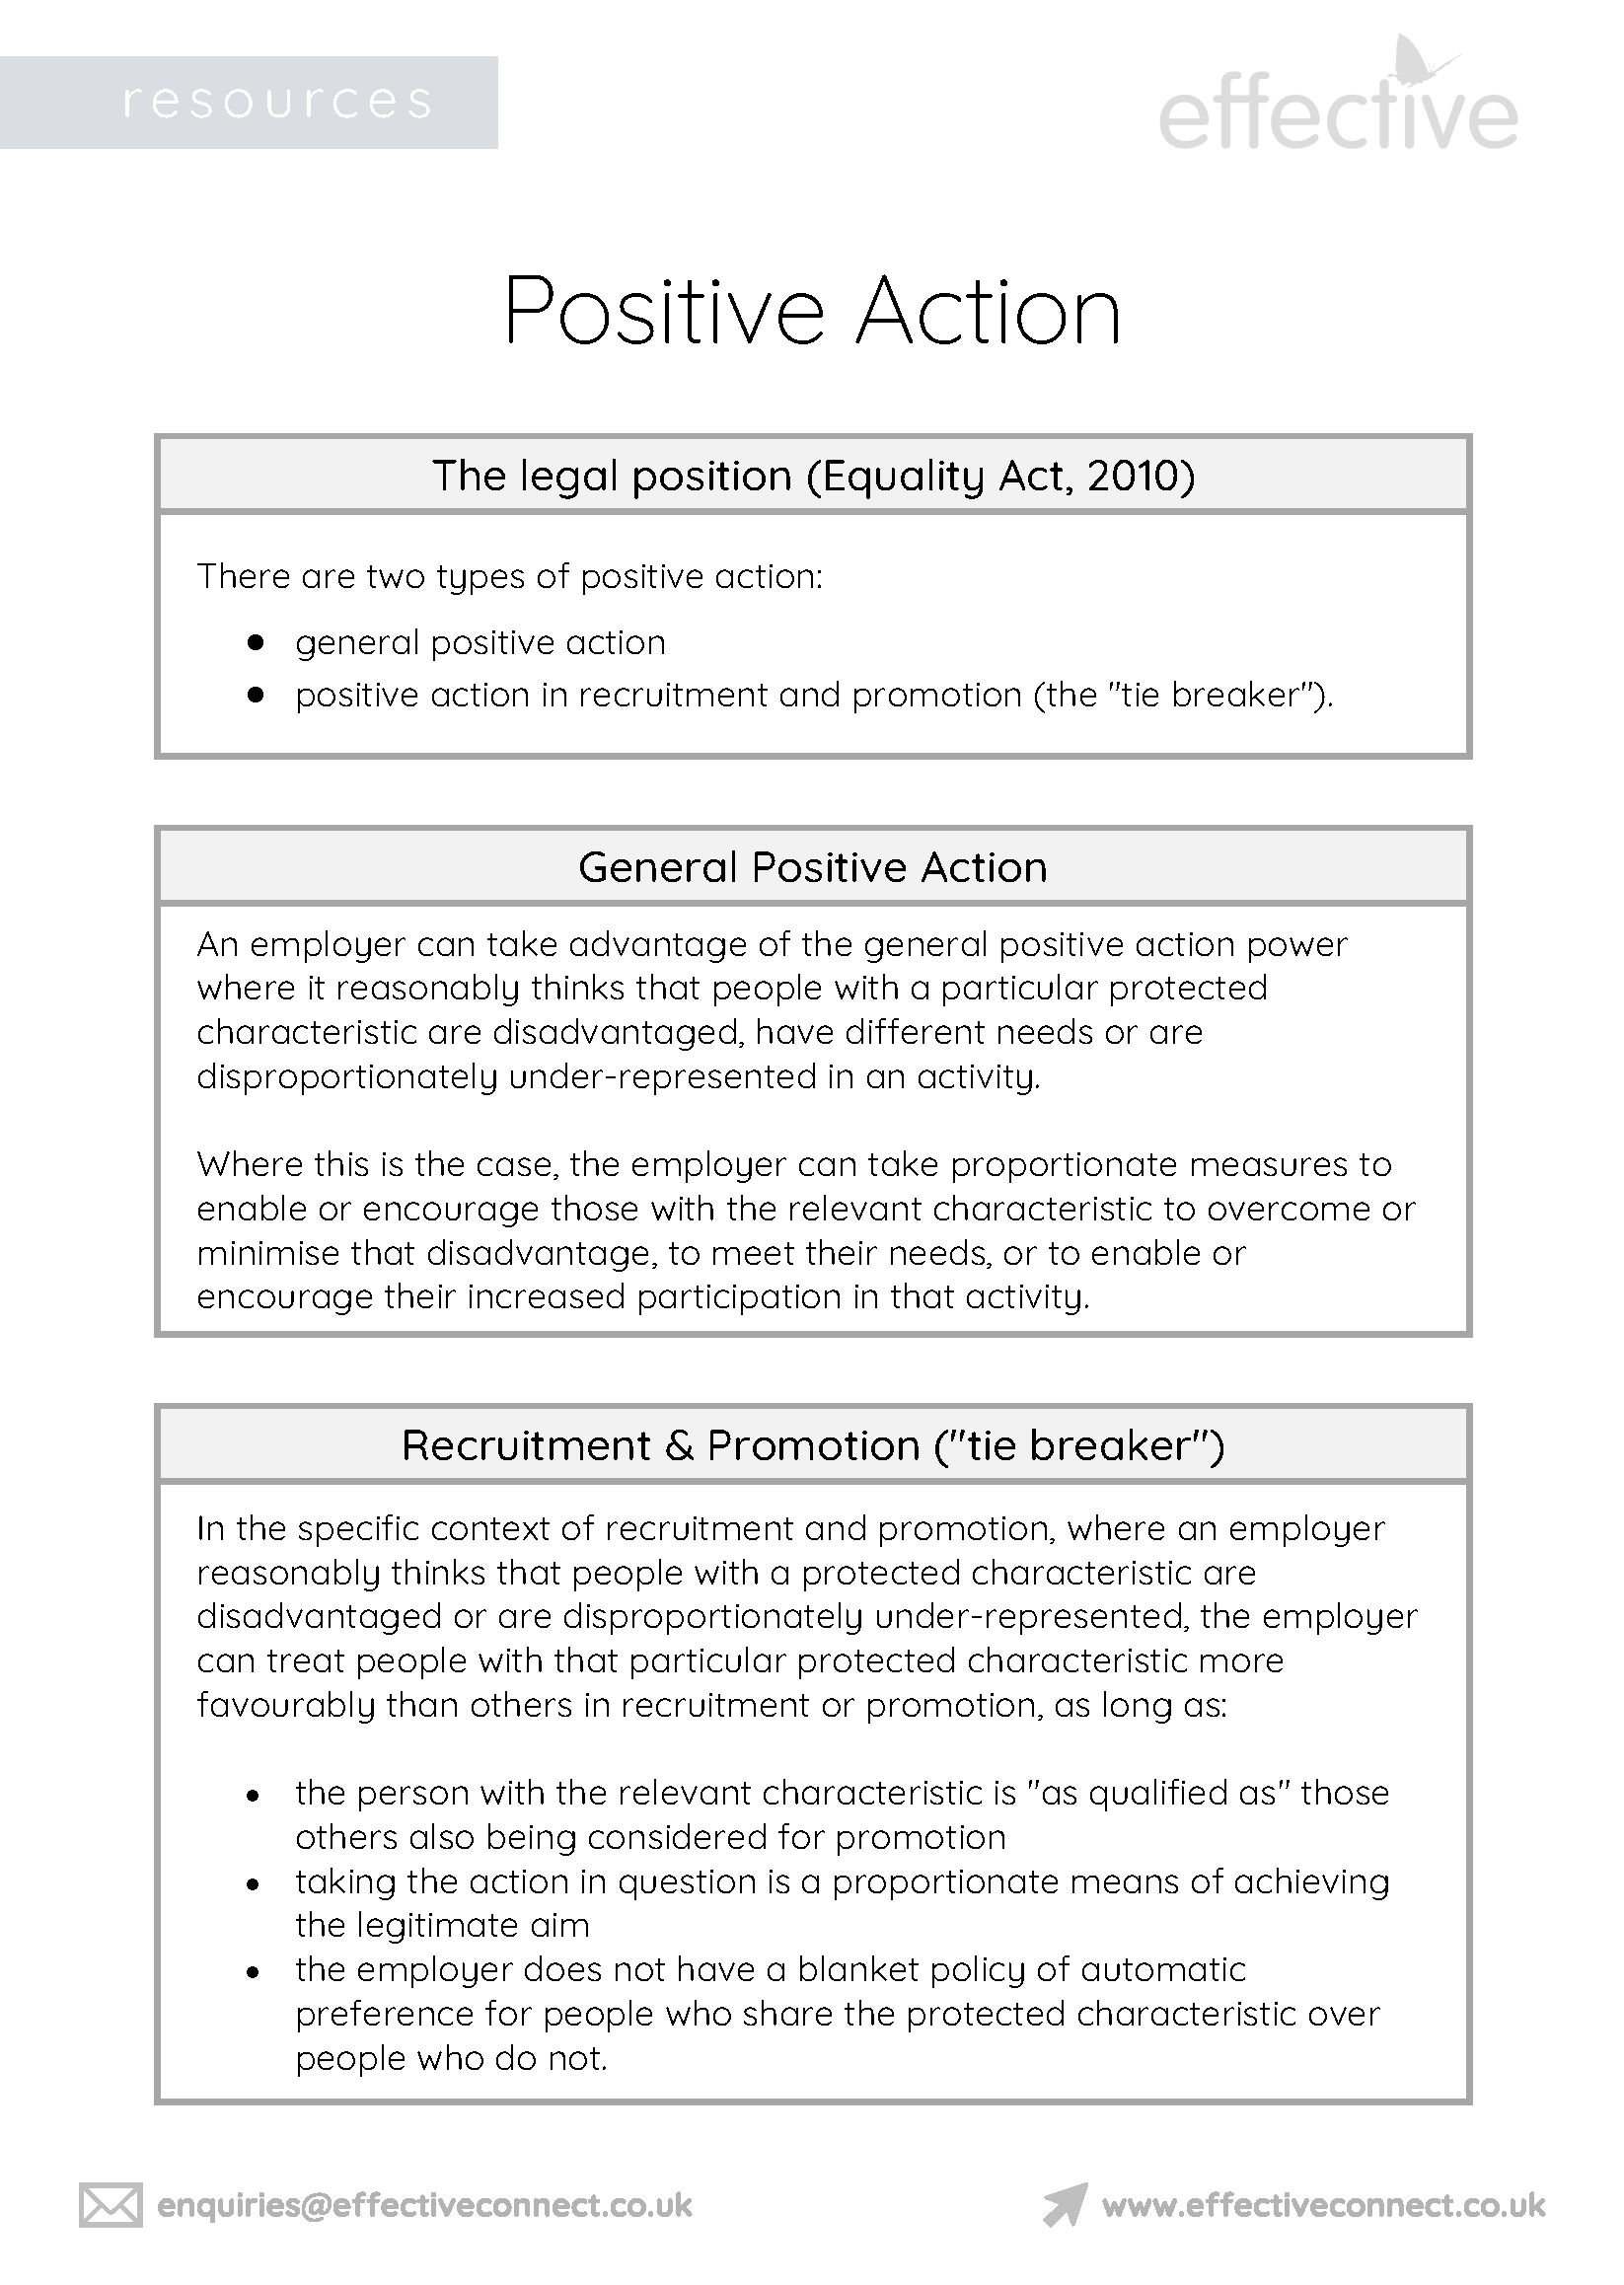 Positive Action<br>(The Equality Act 2010)